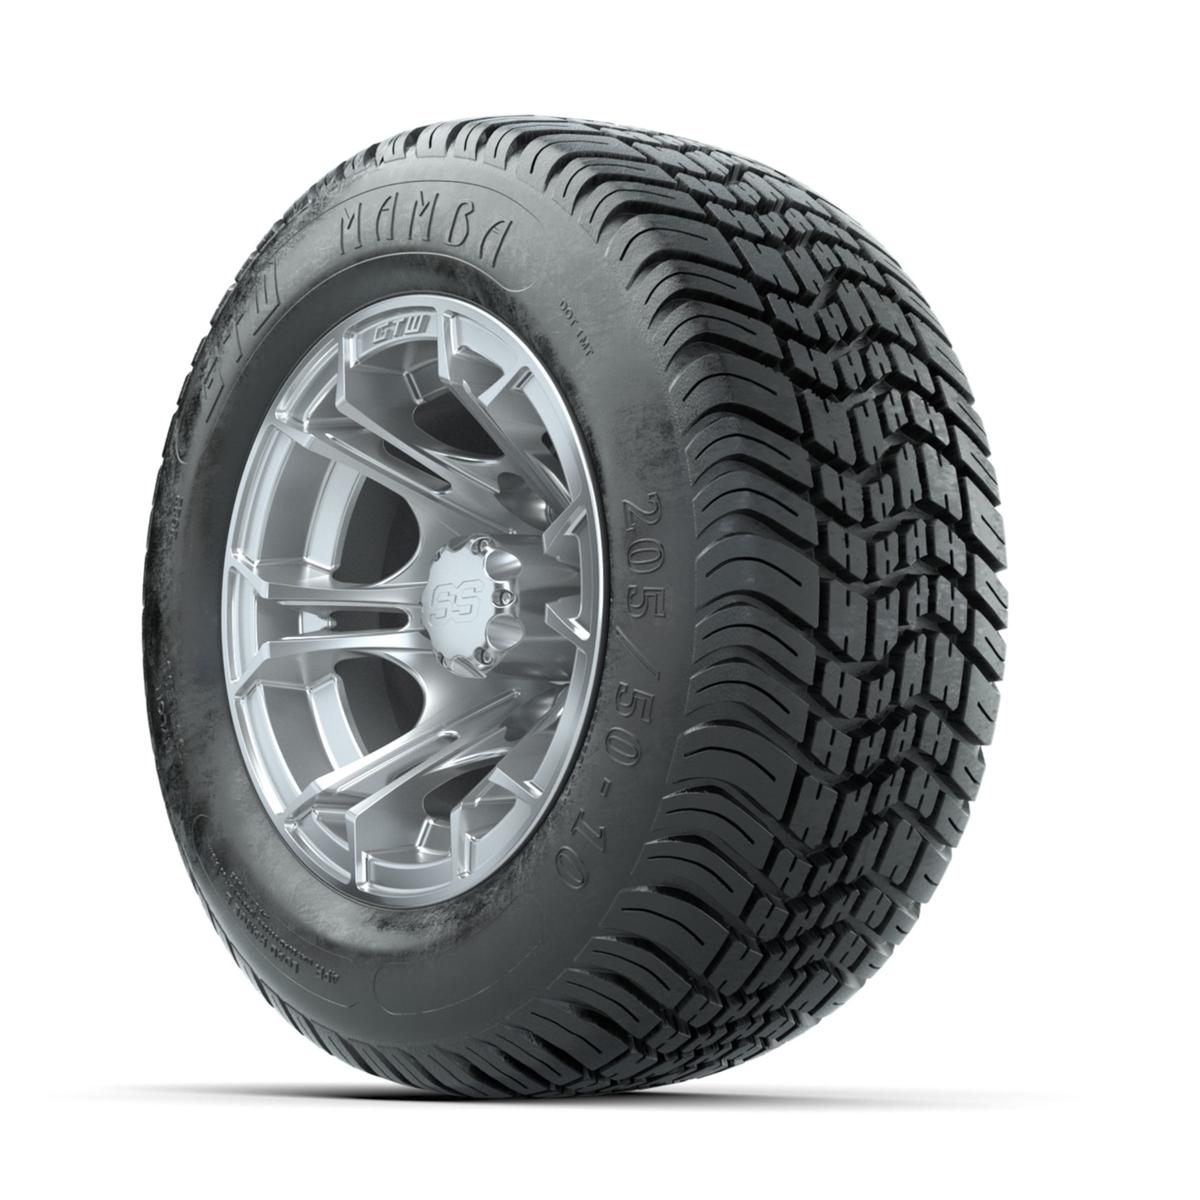 GTW Spyder Silver Brush 10 in Wheels with 205/50-10 Mamba Street Tires – Full Set